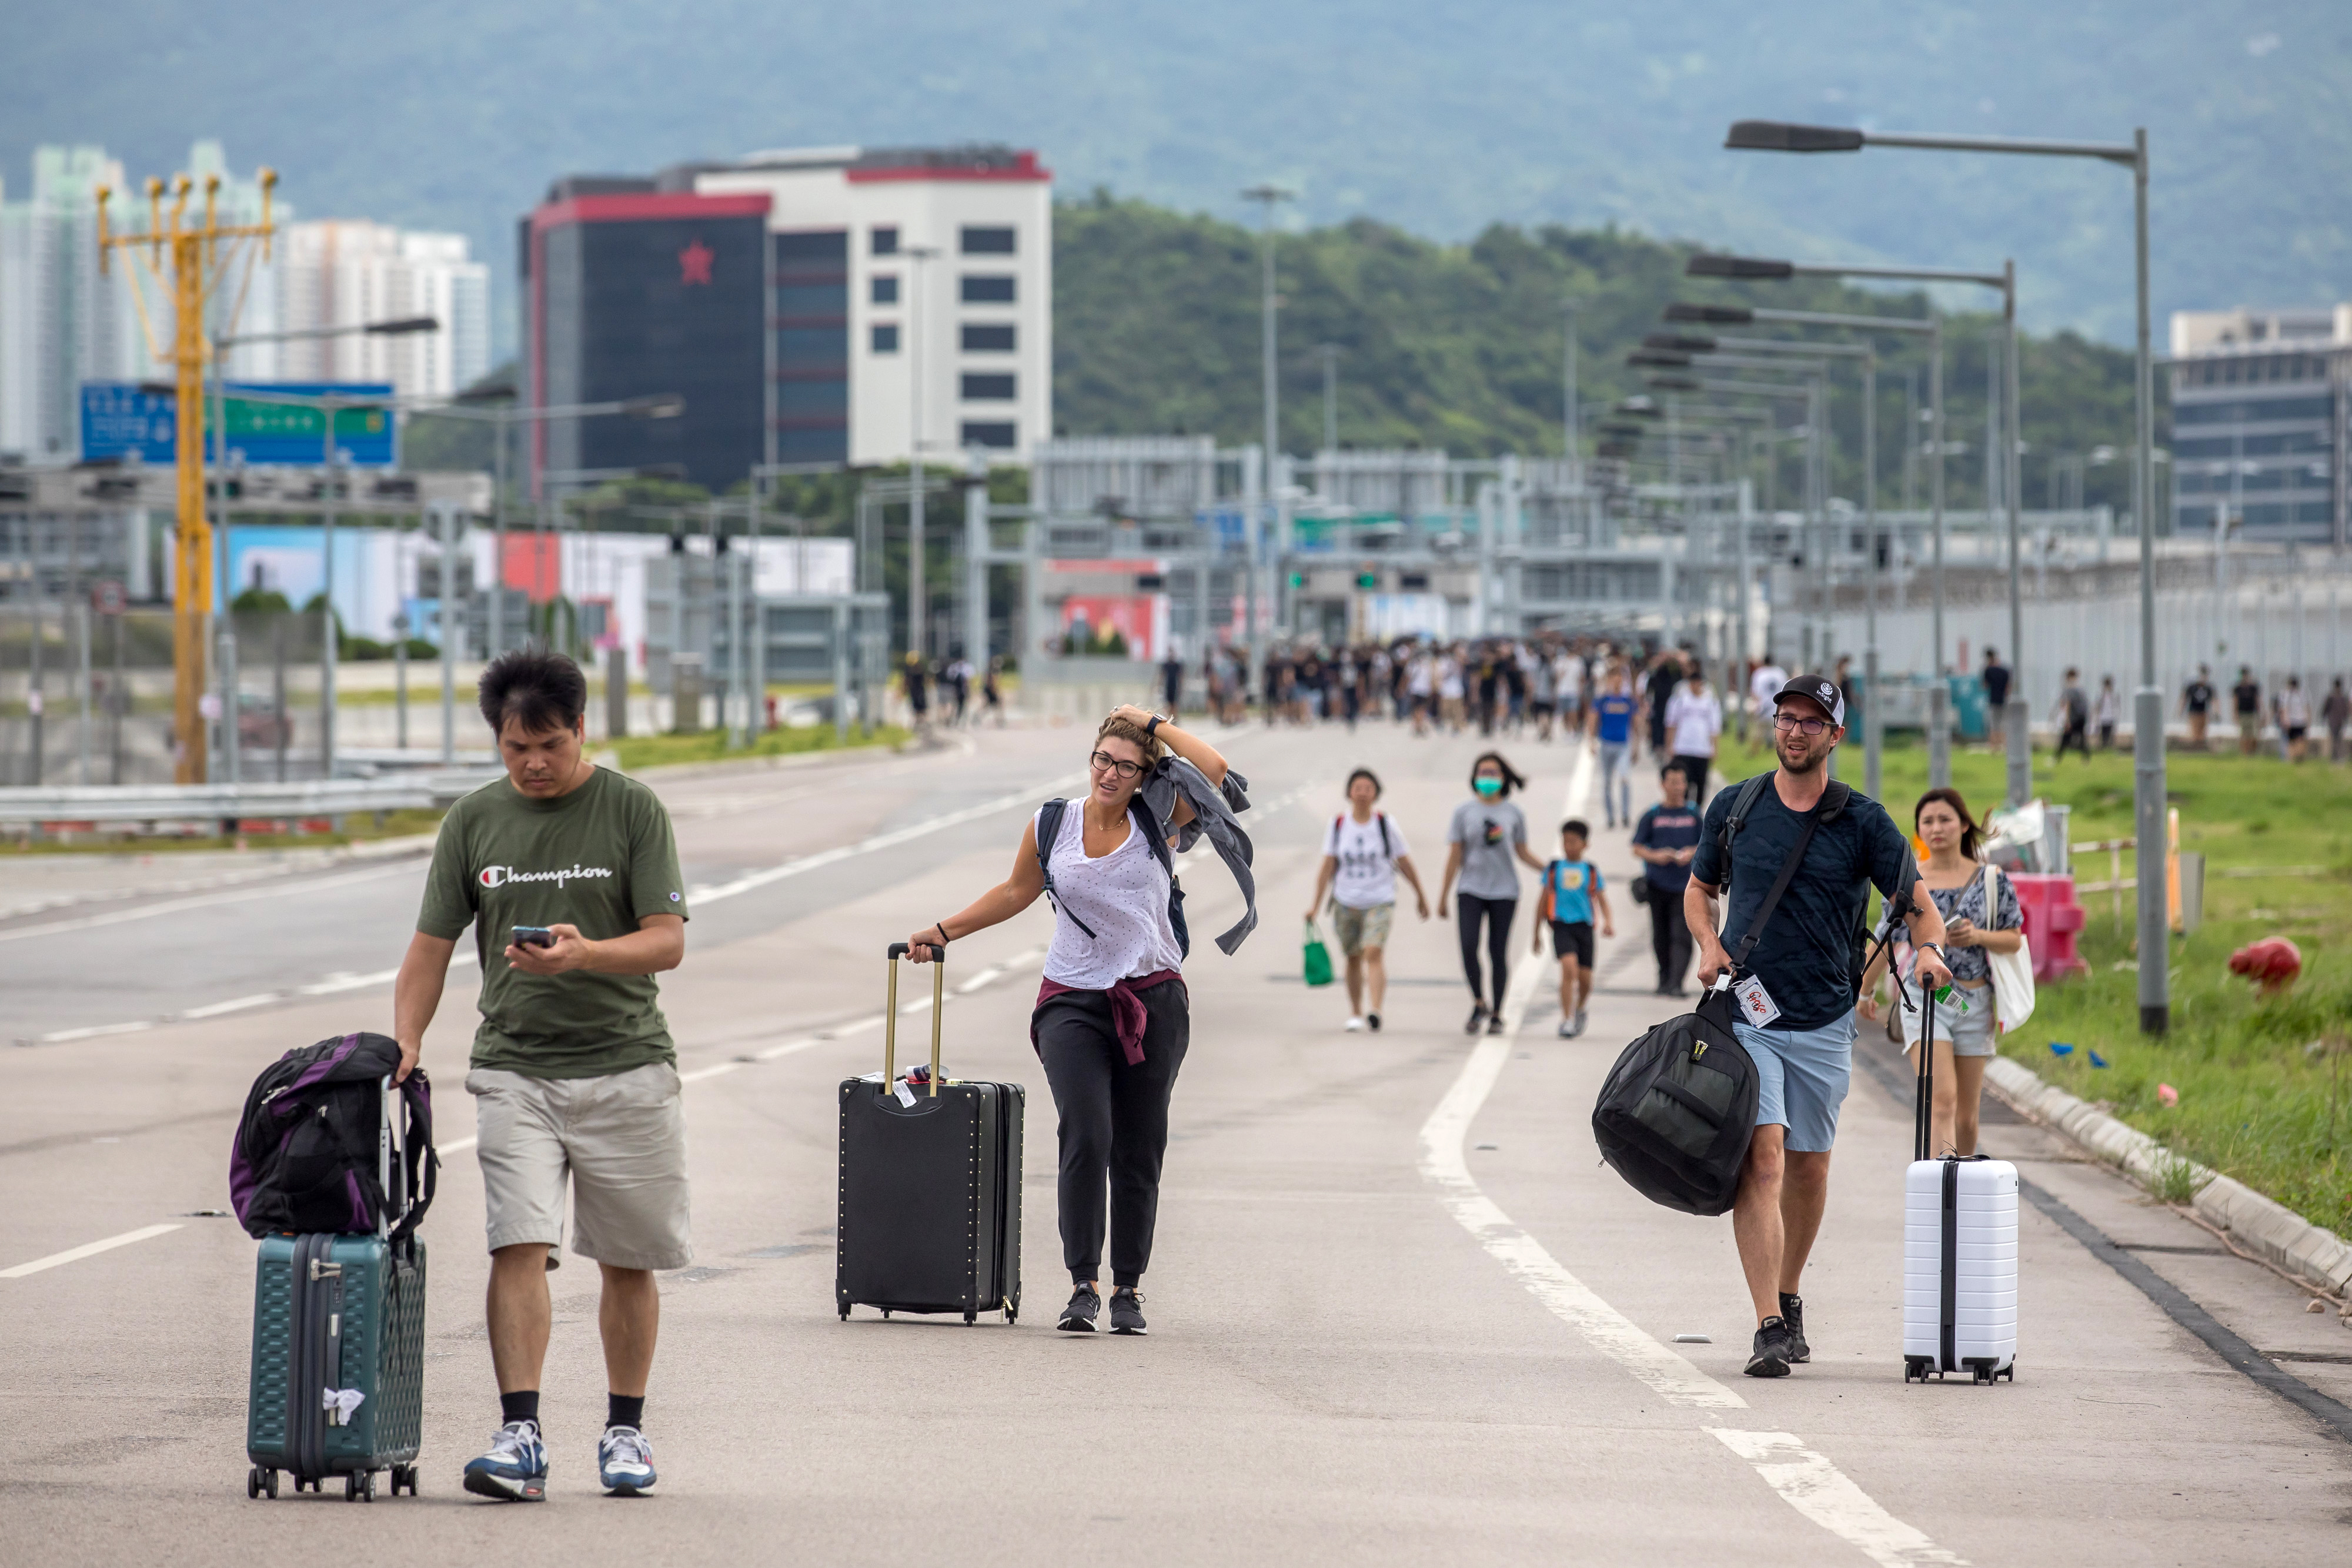 Travelers walk with their luggage along a road towards the Hong Kong International Airport during a protest in Hong Kong, China, on Sunday, Sept. 1, 2019.